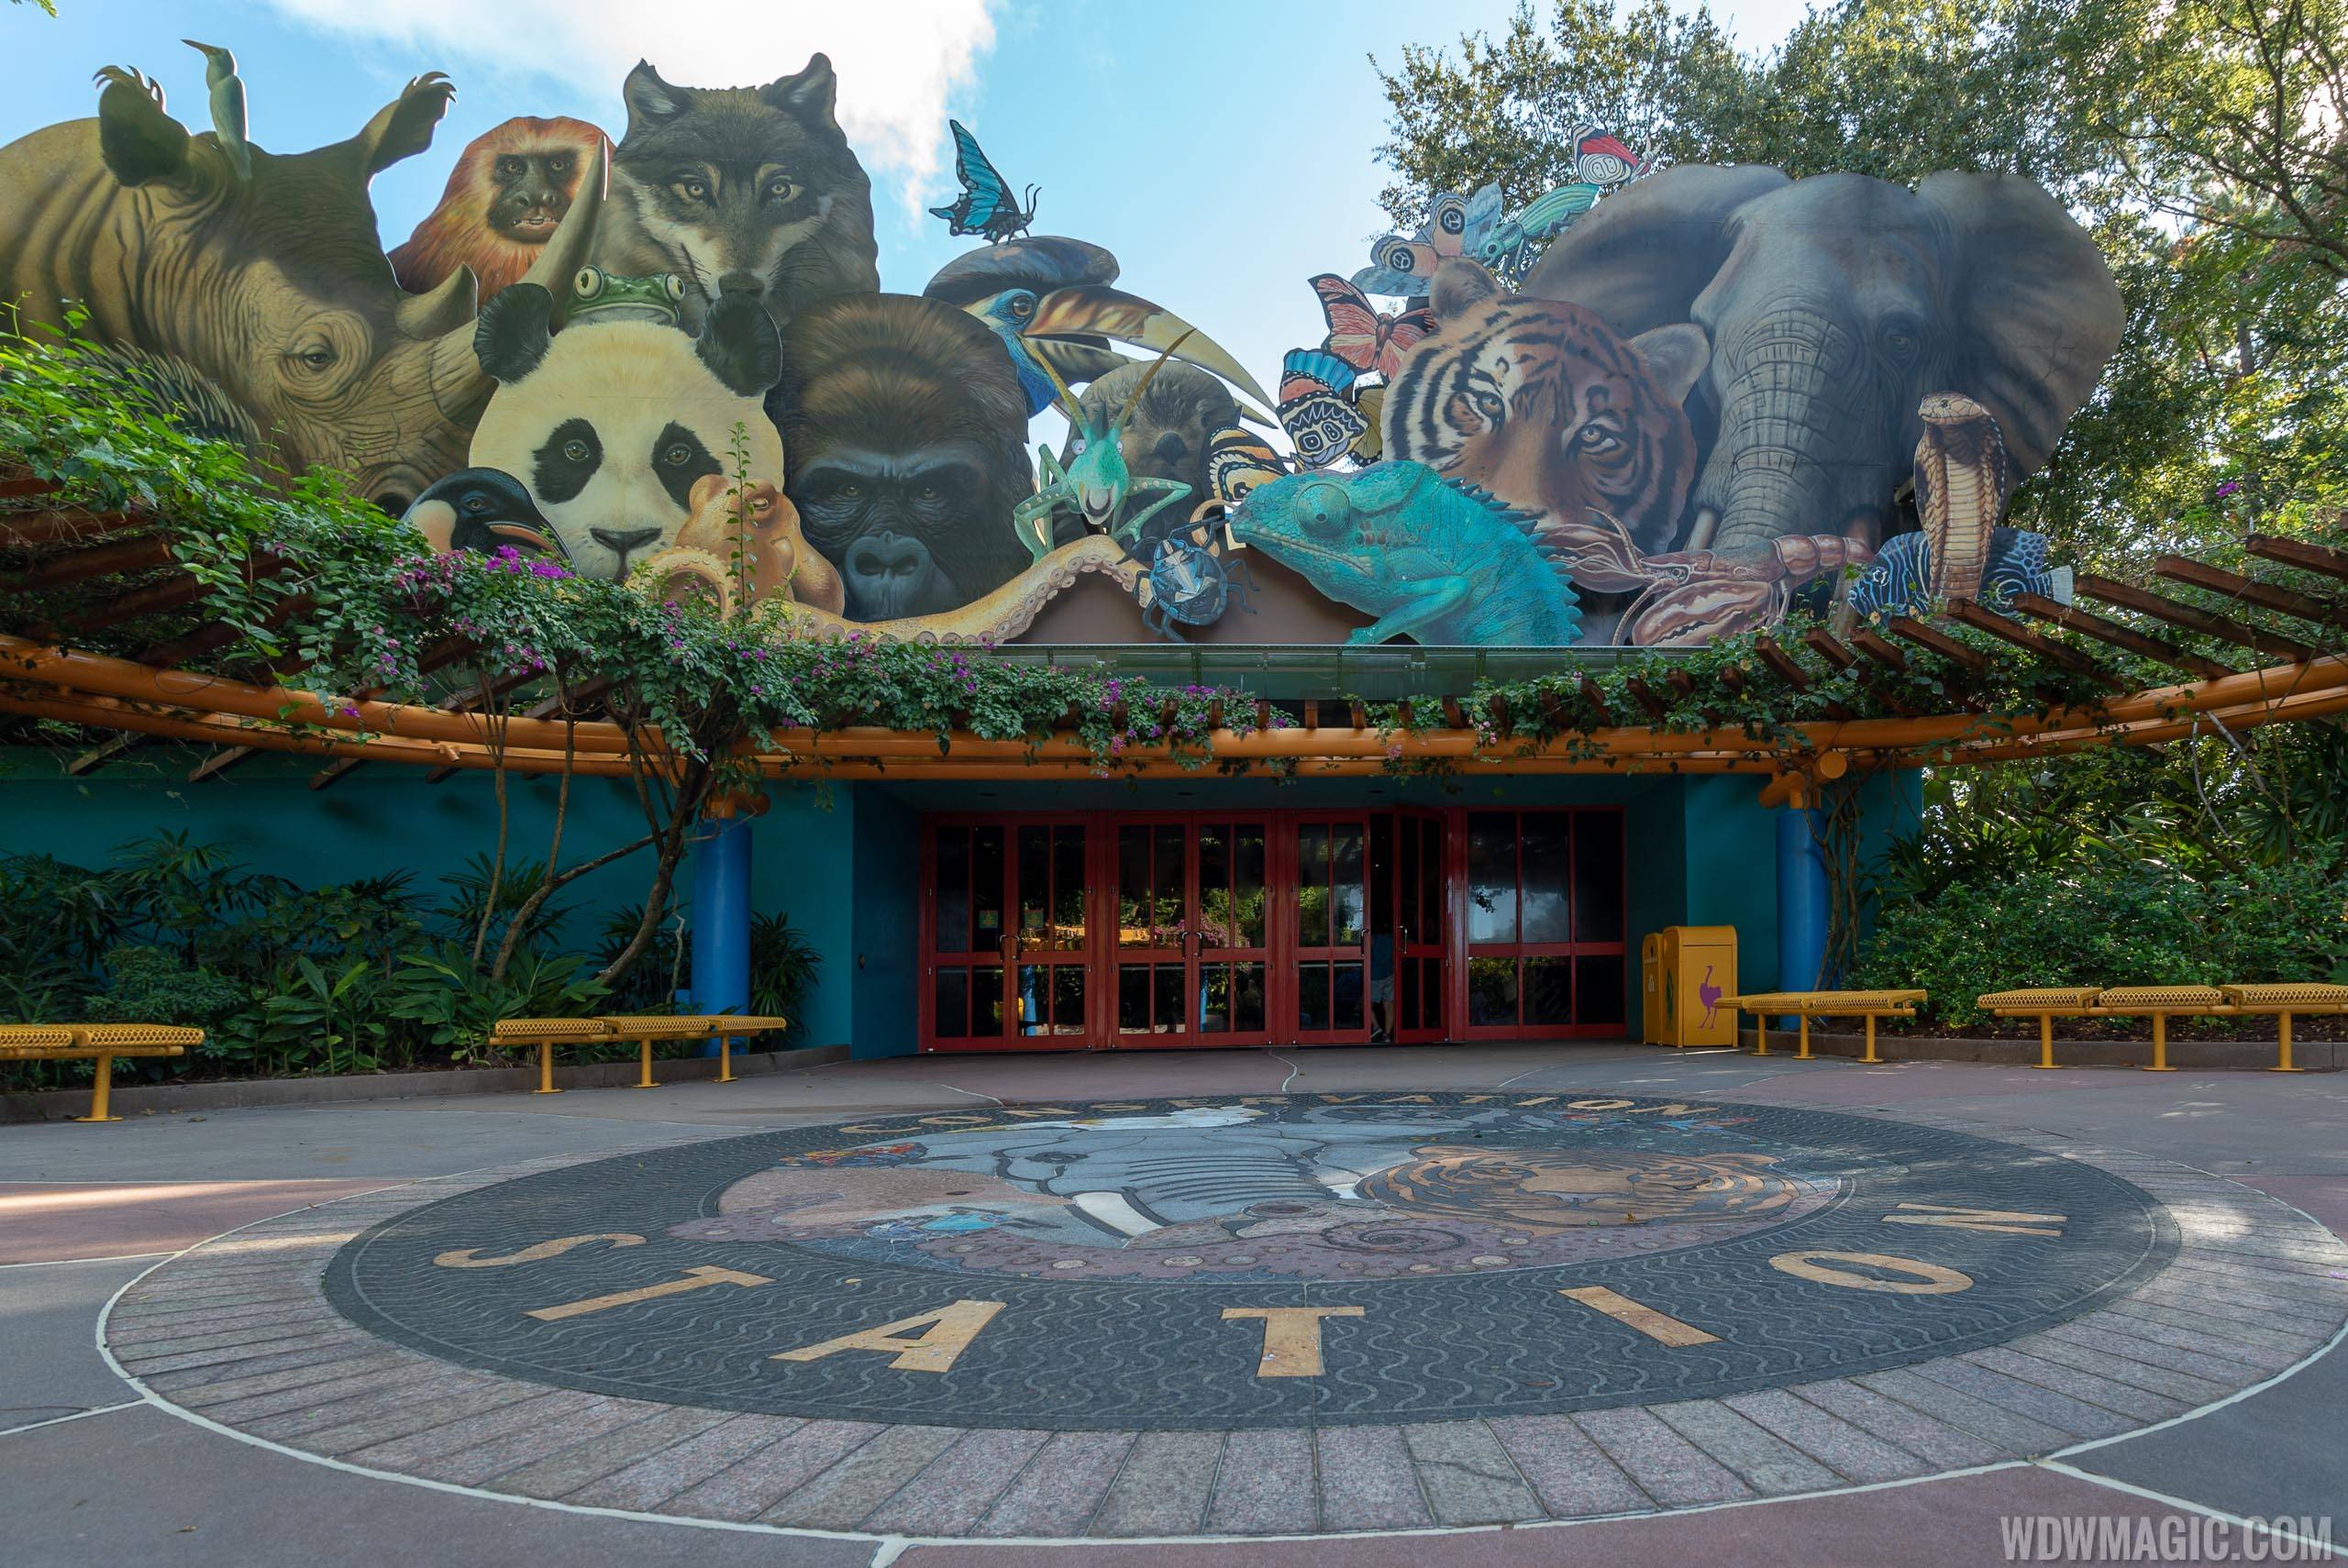 Rafiki's Planet Watch closing early today